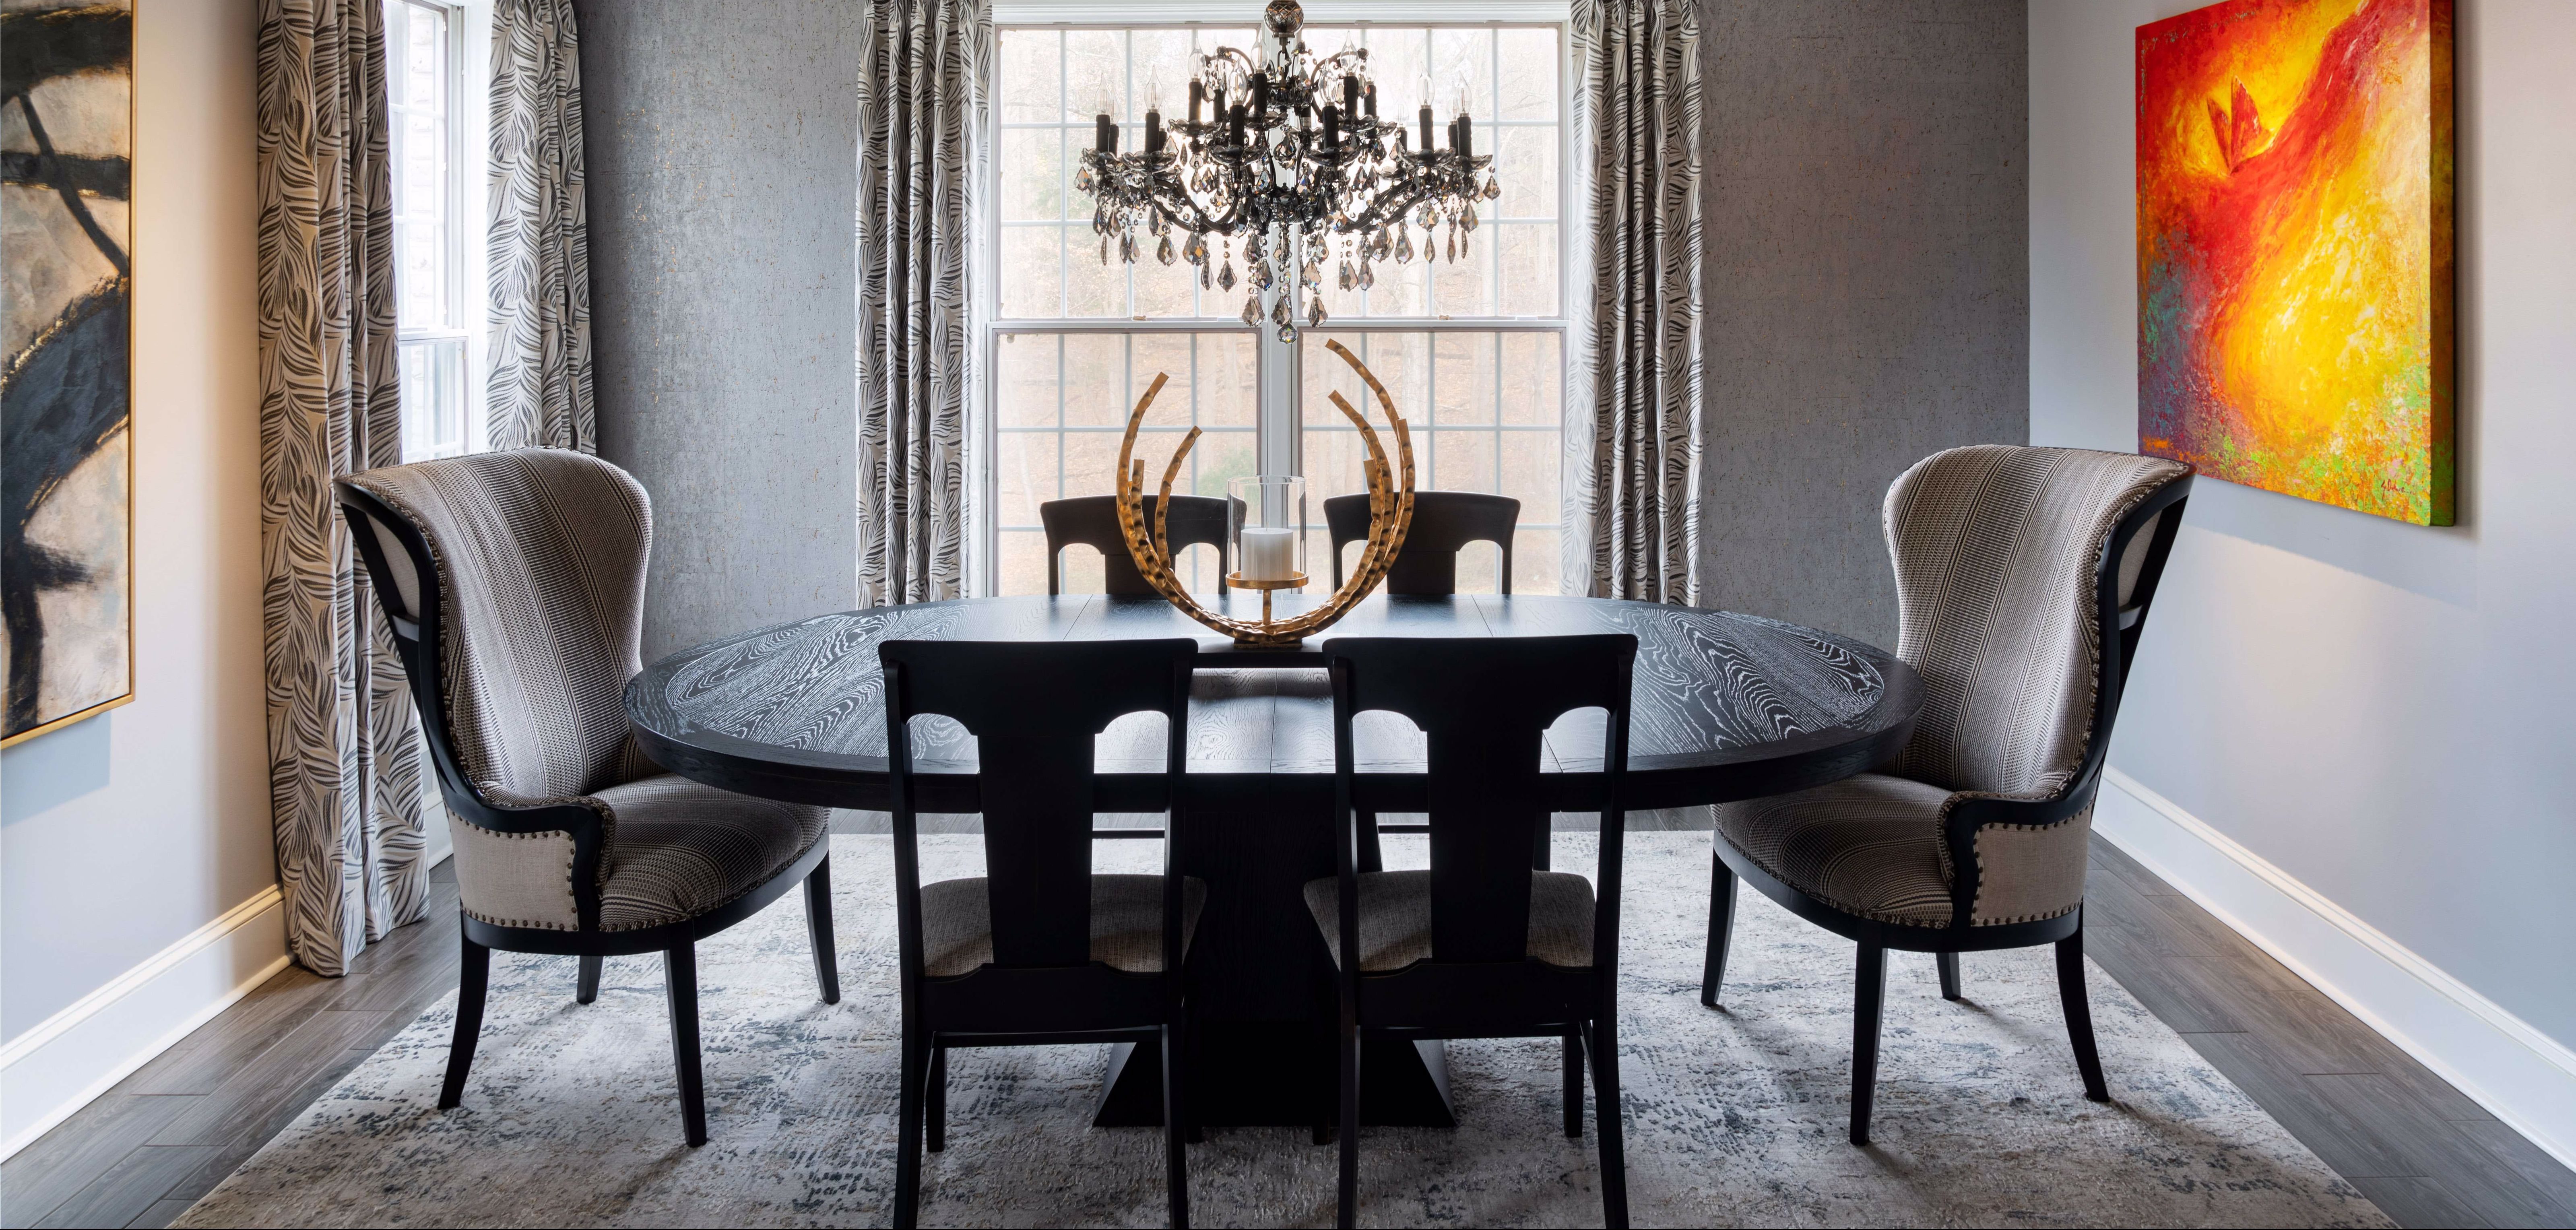 How to choose the right area rug for your dining room